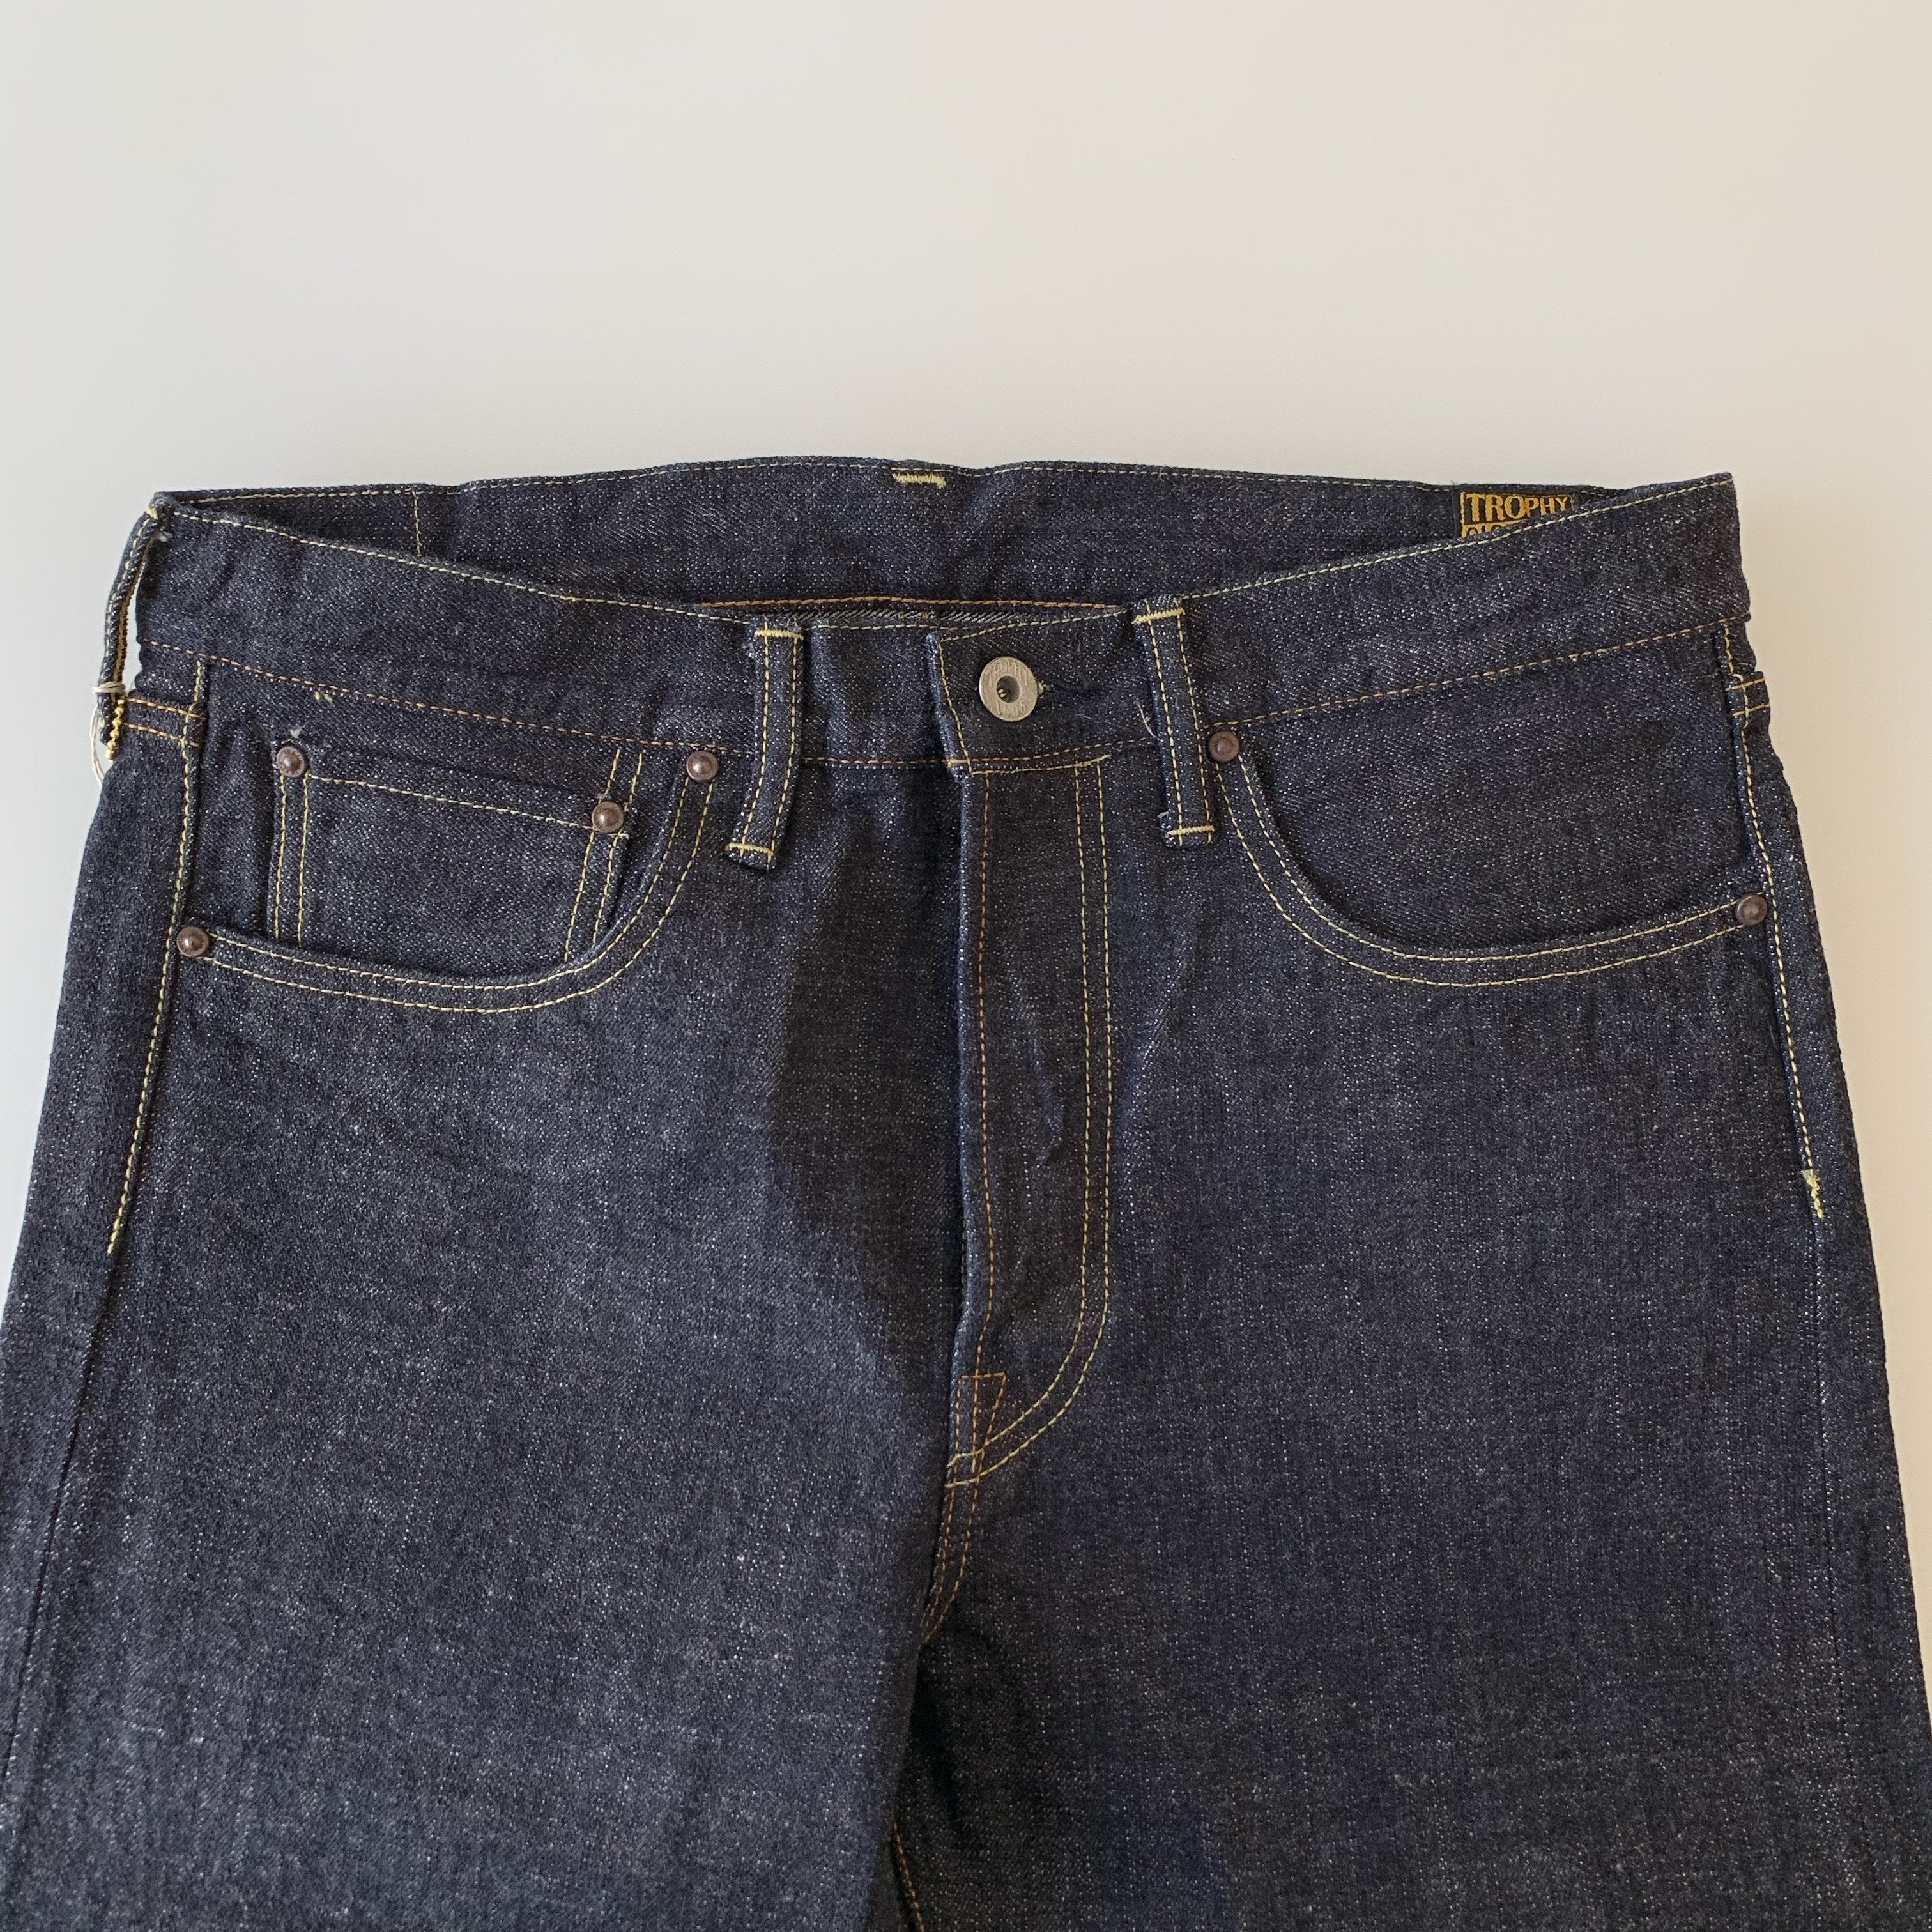 TROPHY CLOTHING - 1609 Urban Narrow Dirt Denim Tapered at TEMPO SF